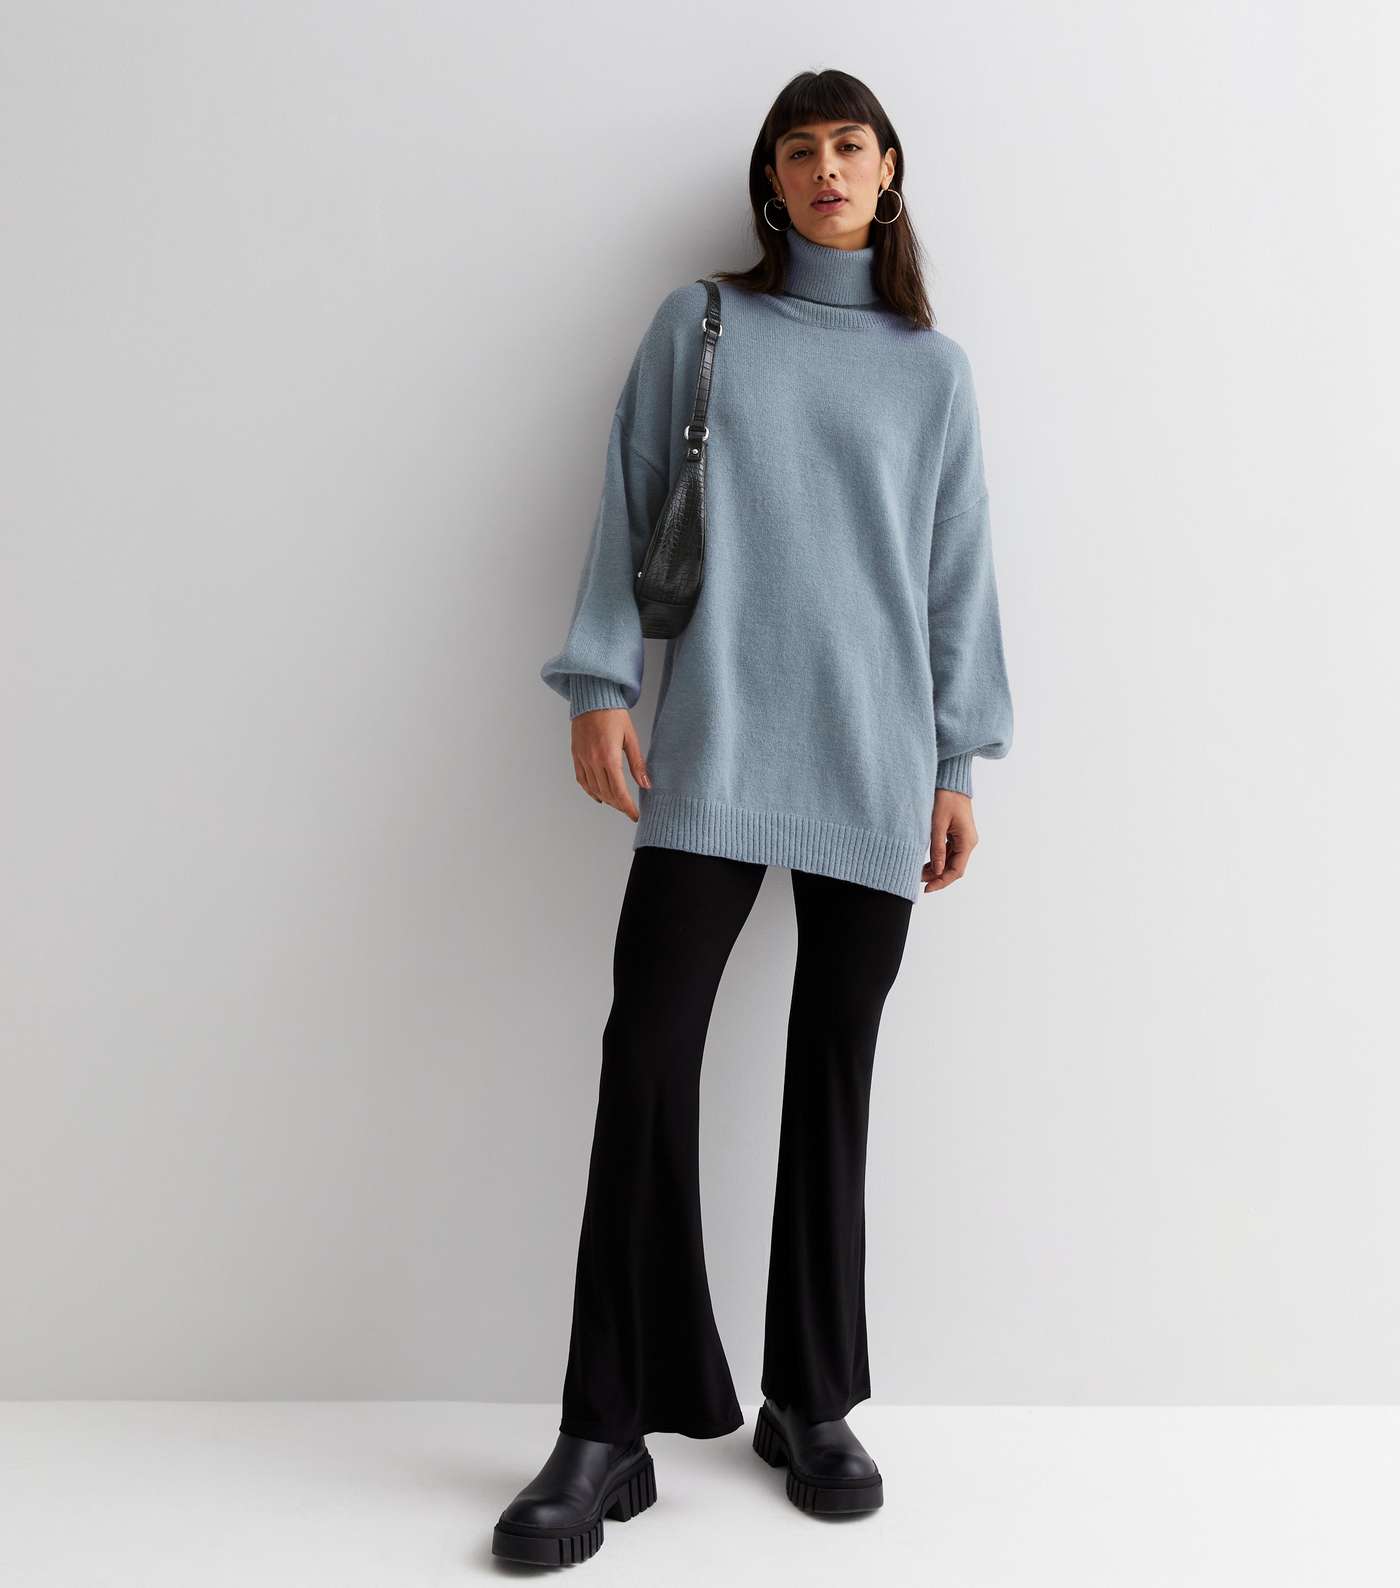 Gini London Pale Grey Knit Roll Neck Jumper Image 2